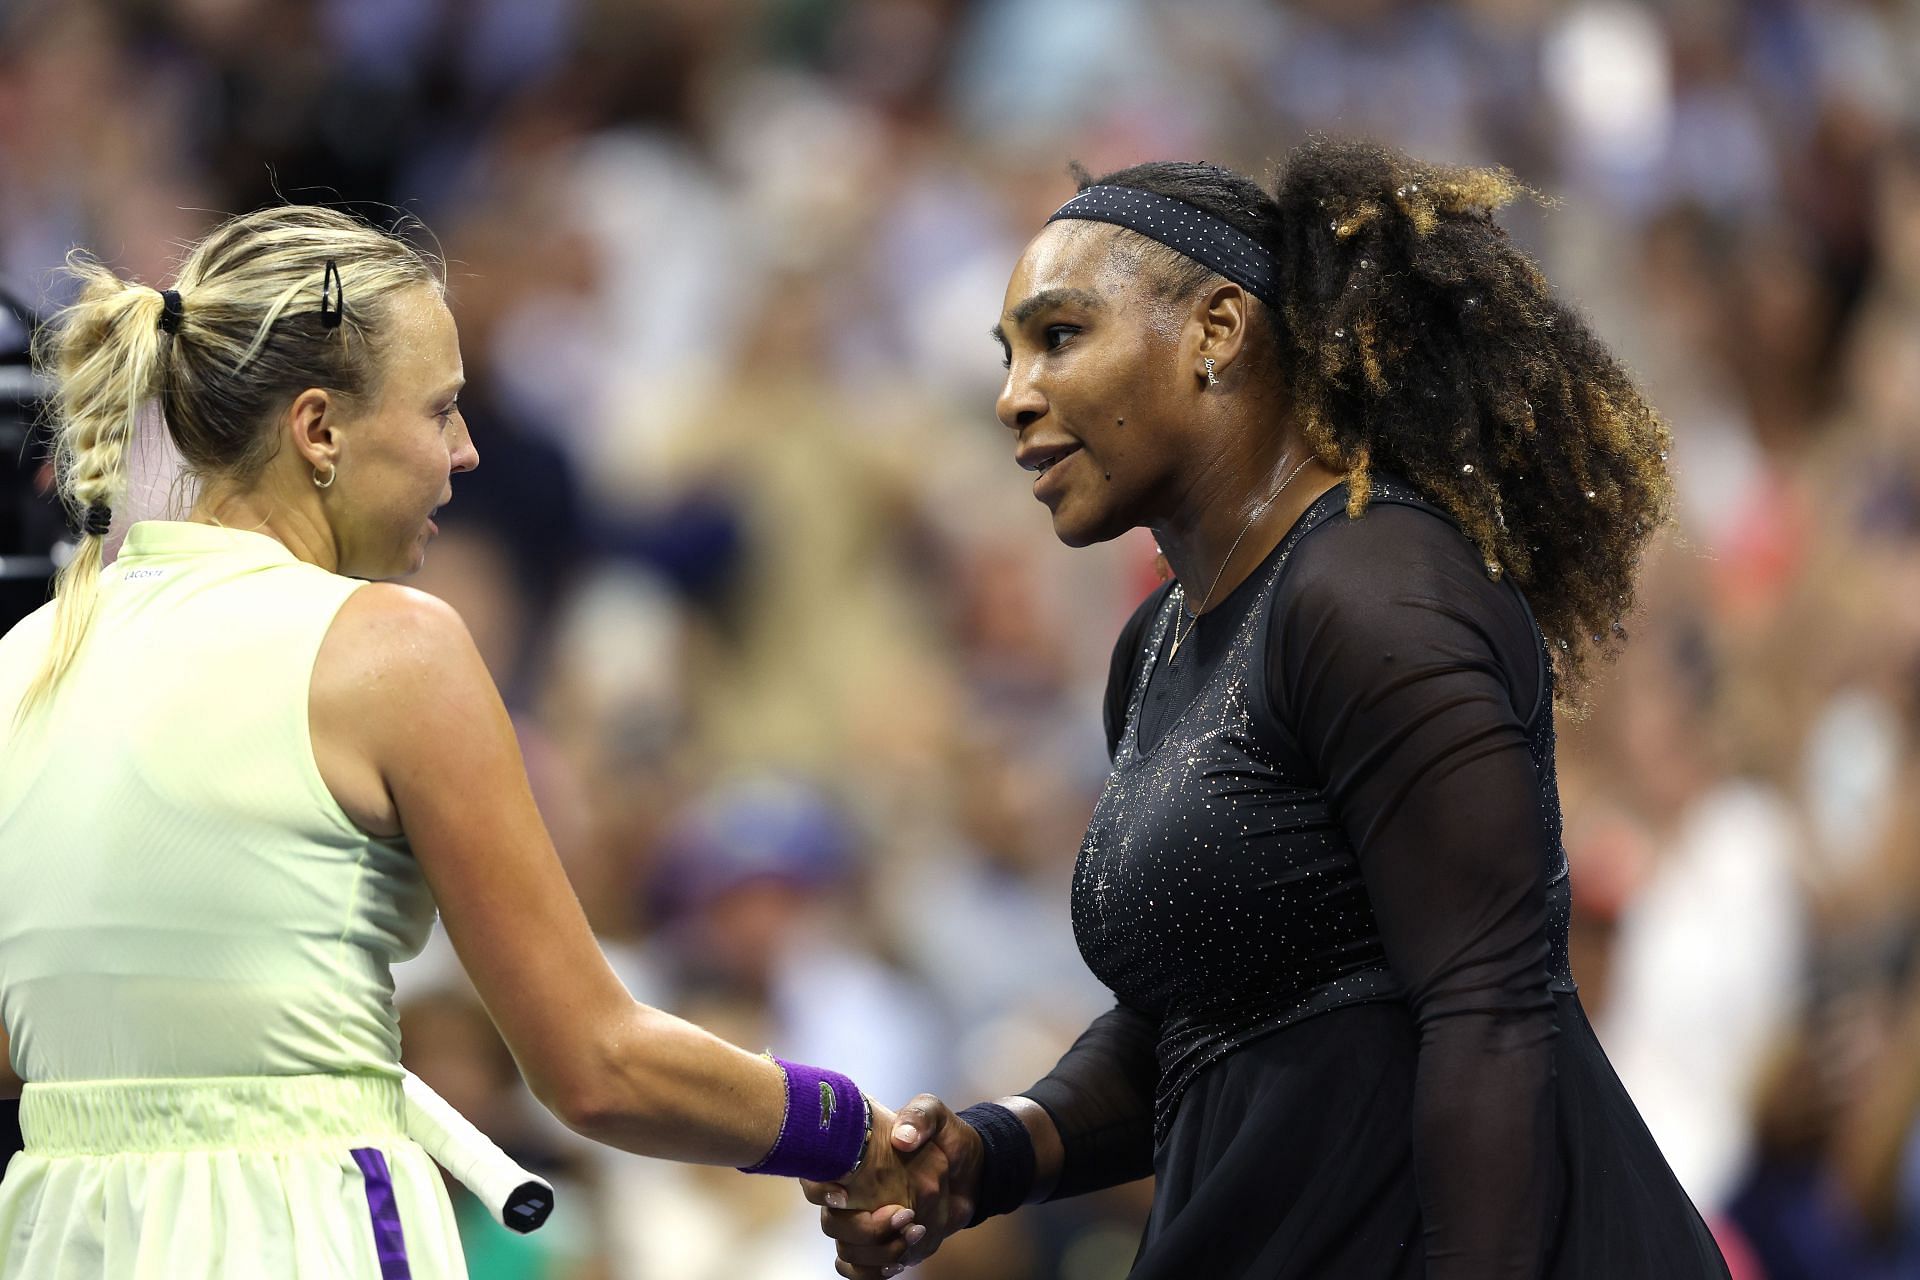 Serena Williams (right) shares a handshake with Anett Kontaveit (left) after their second-round match at the US Open.